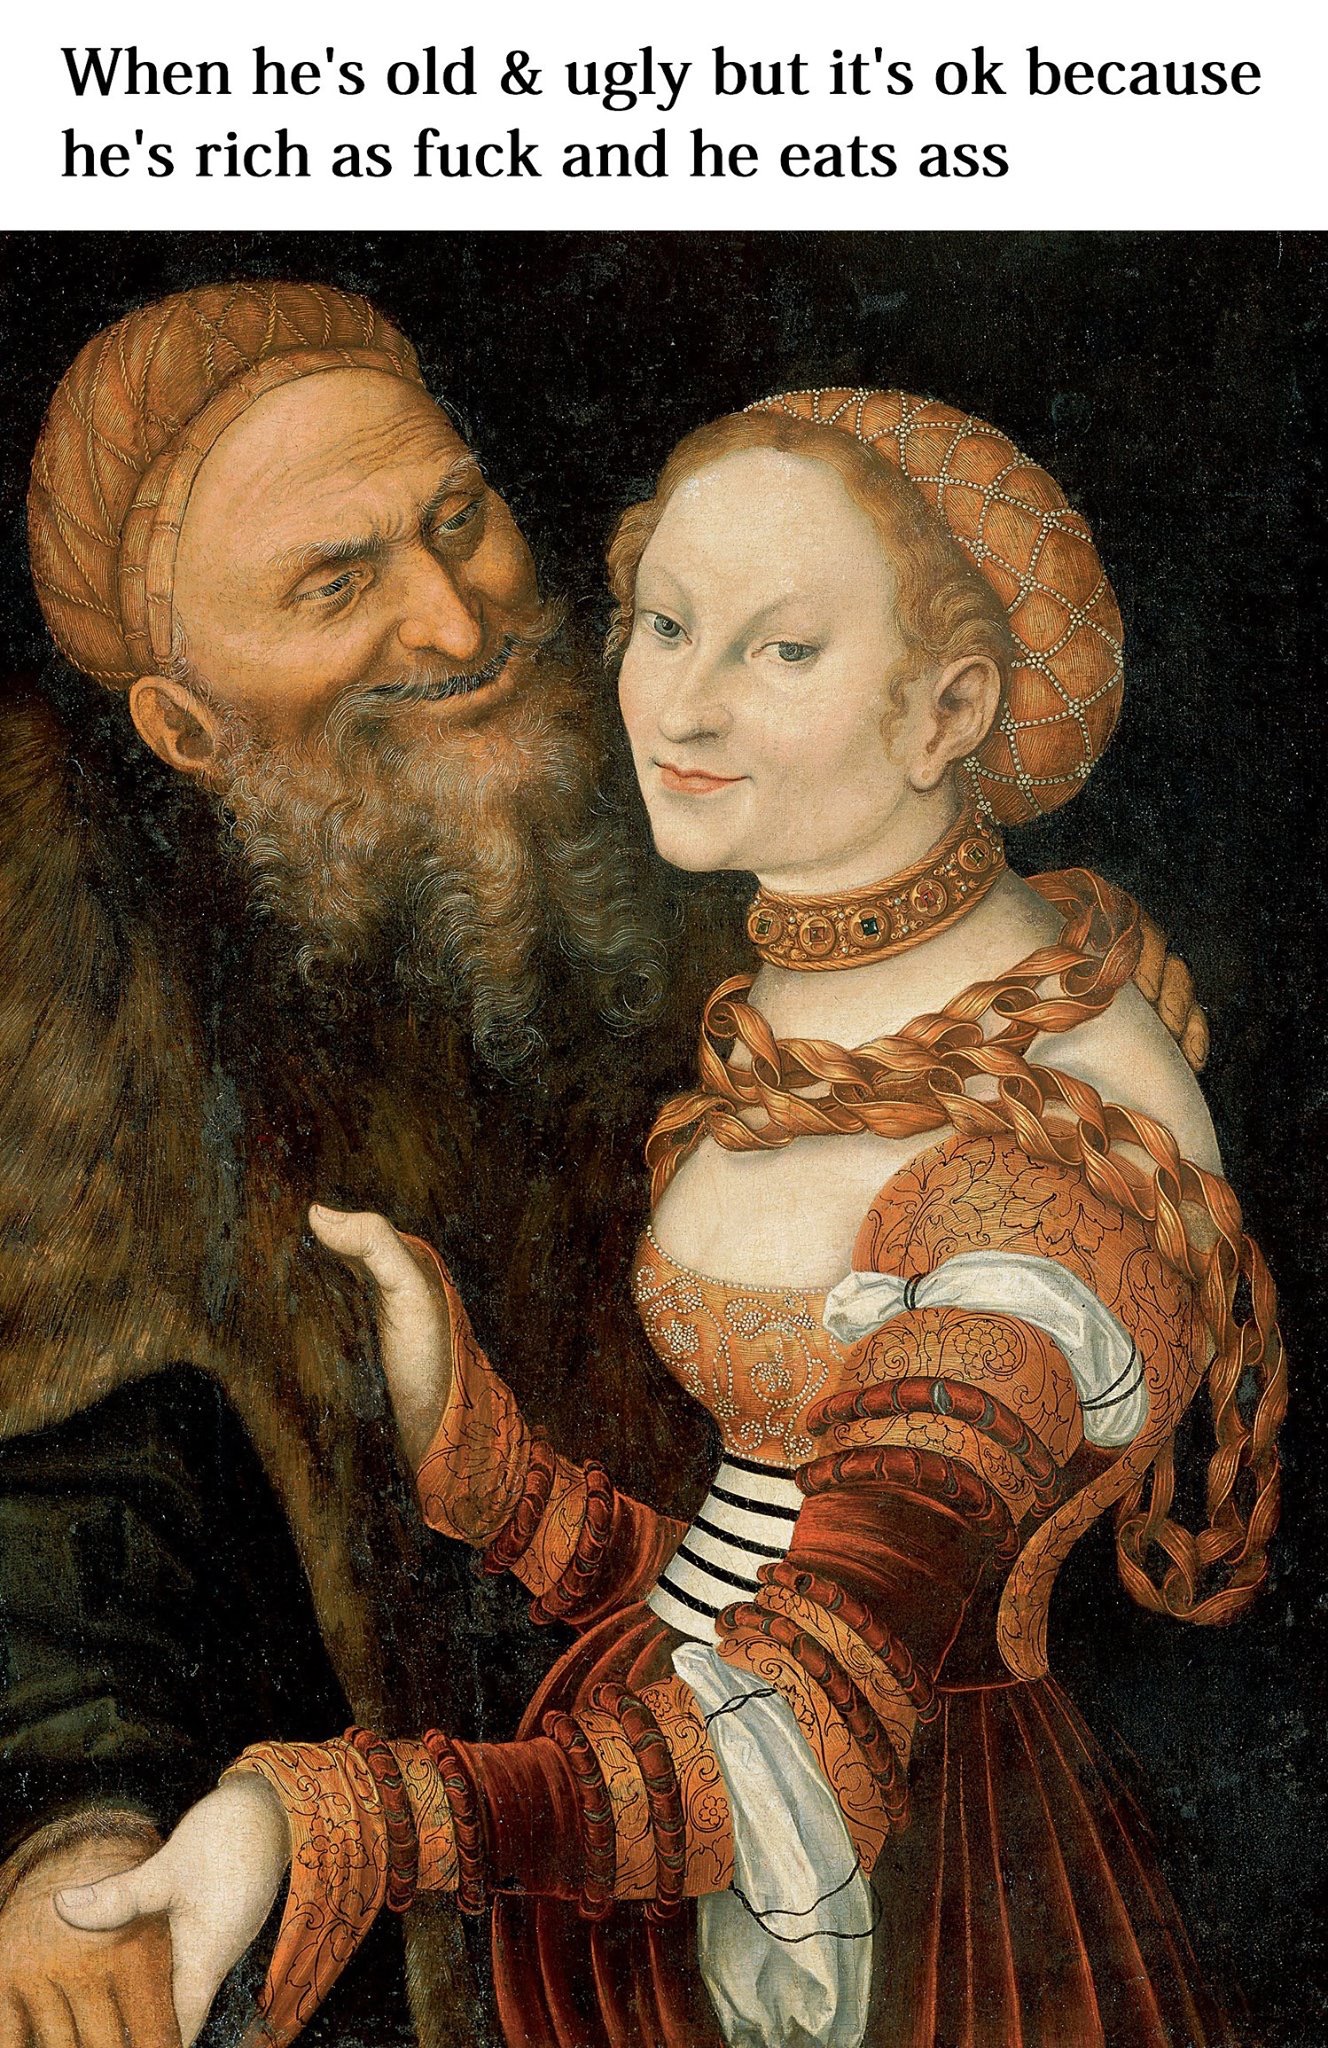 lucas cranach the elder courtesan and old man - When he's old & ugly but it's ok because he's rich as fuck and he eats ass